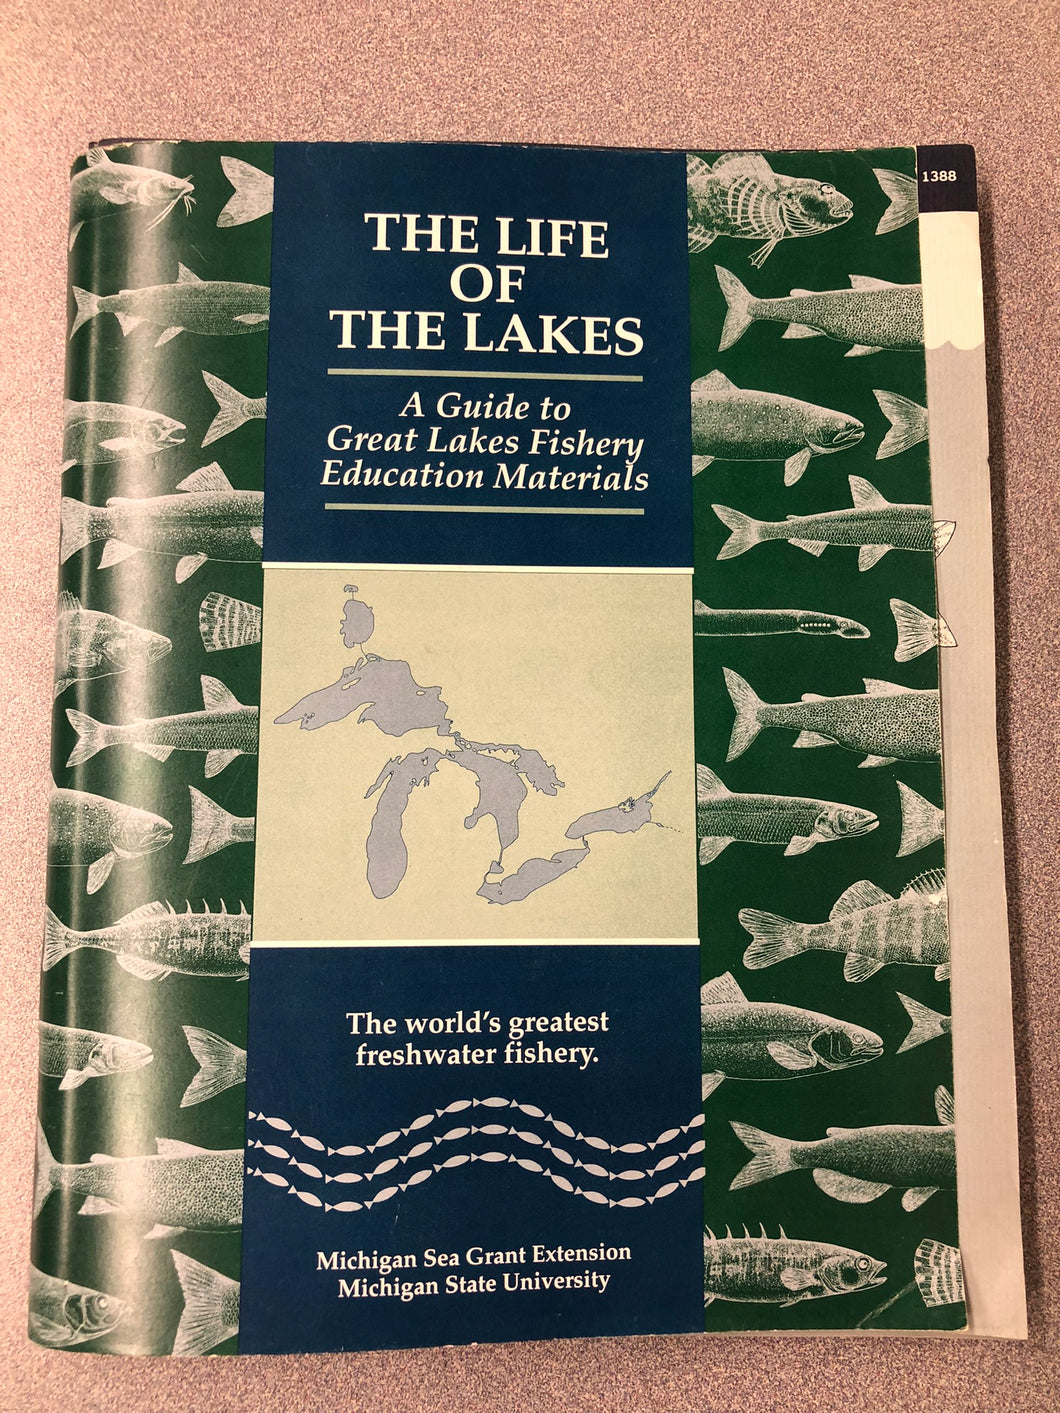 The Life of the Lakes: a Guide to Great Lakes Fishery Education Materials: the World's Greatest Freshwater Fishery, Dann, Shari, [1994] OU 5/22